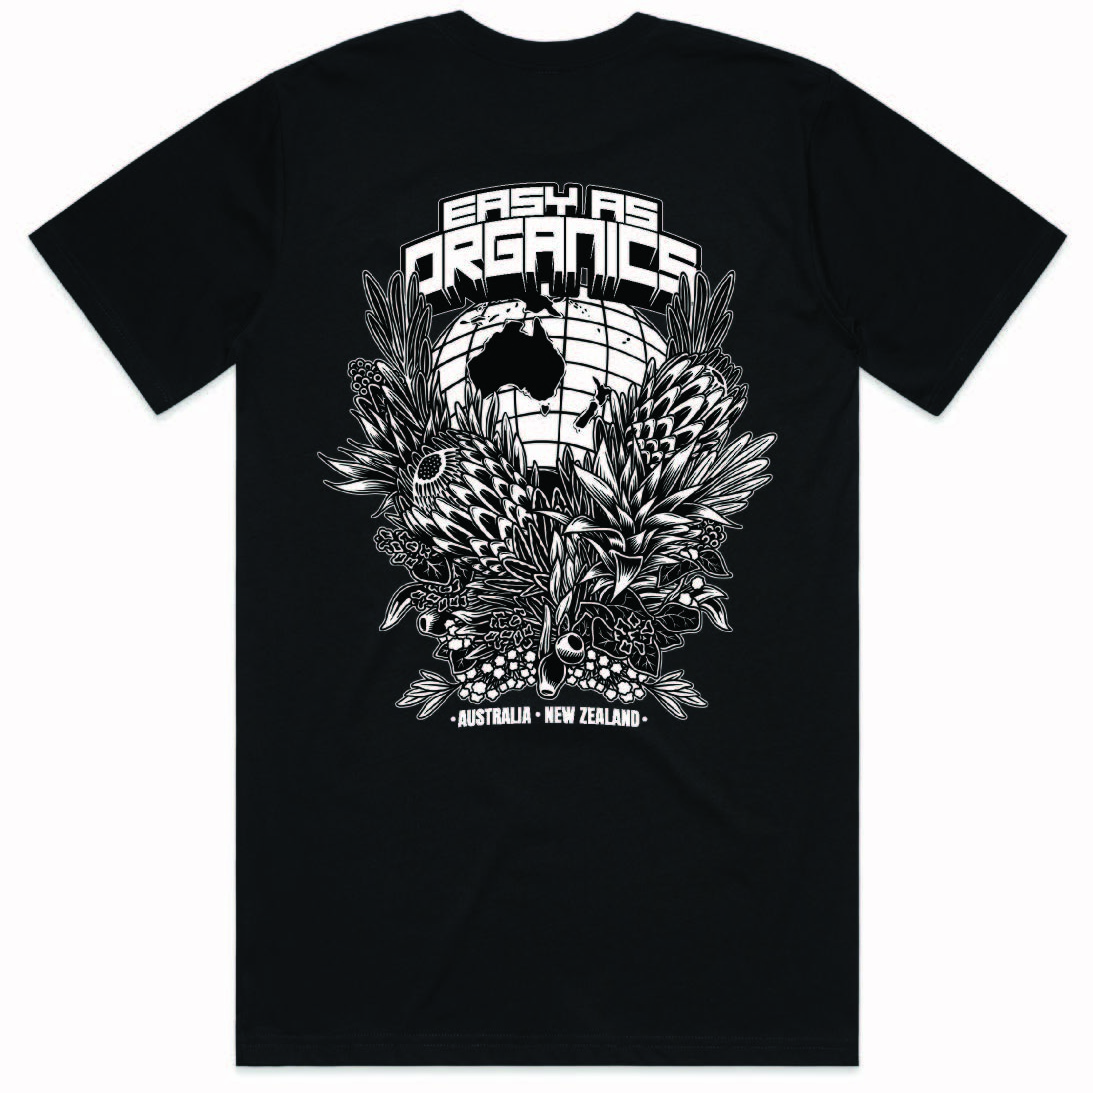 Black t shirt with native plant graphics